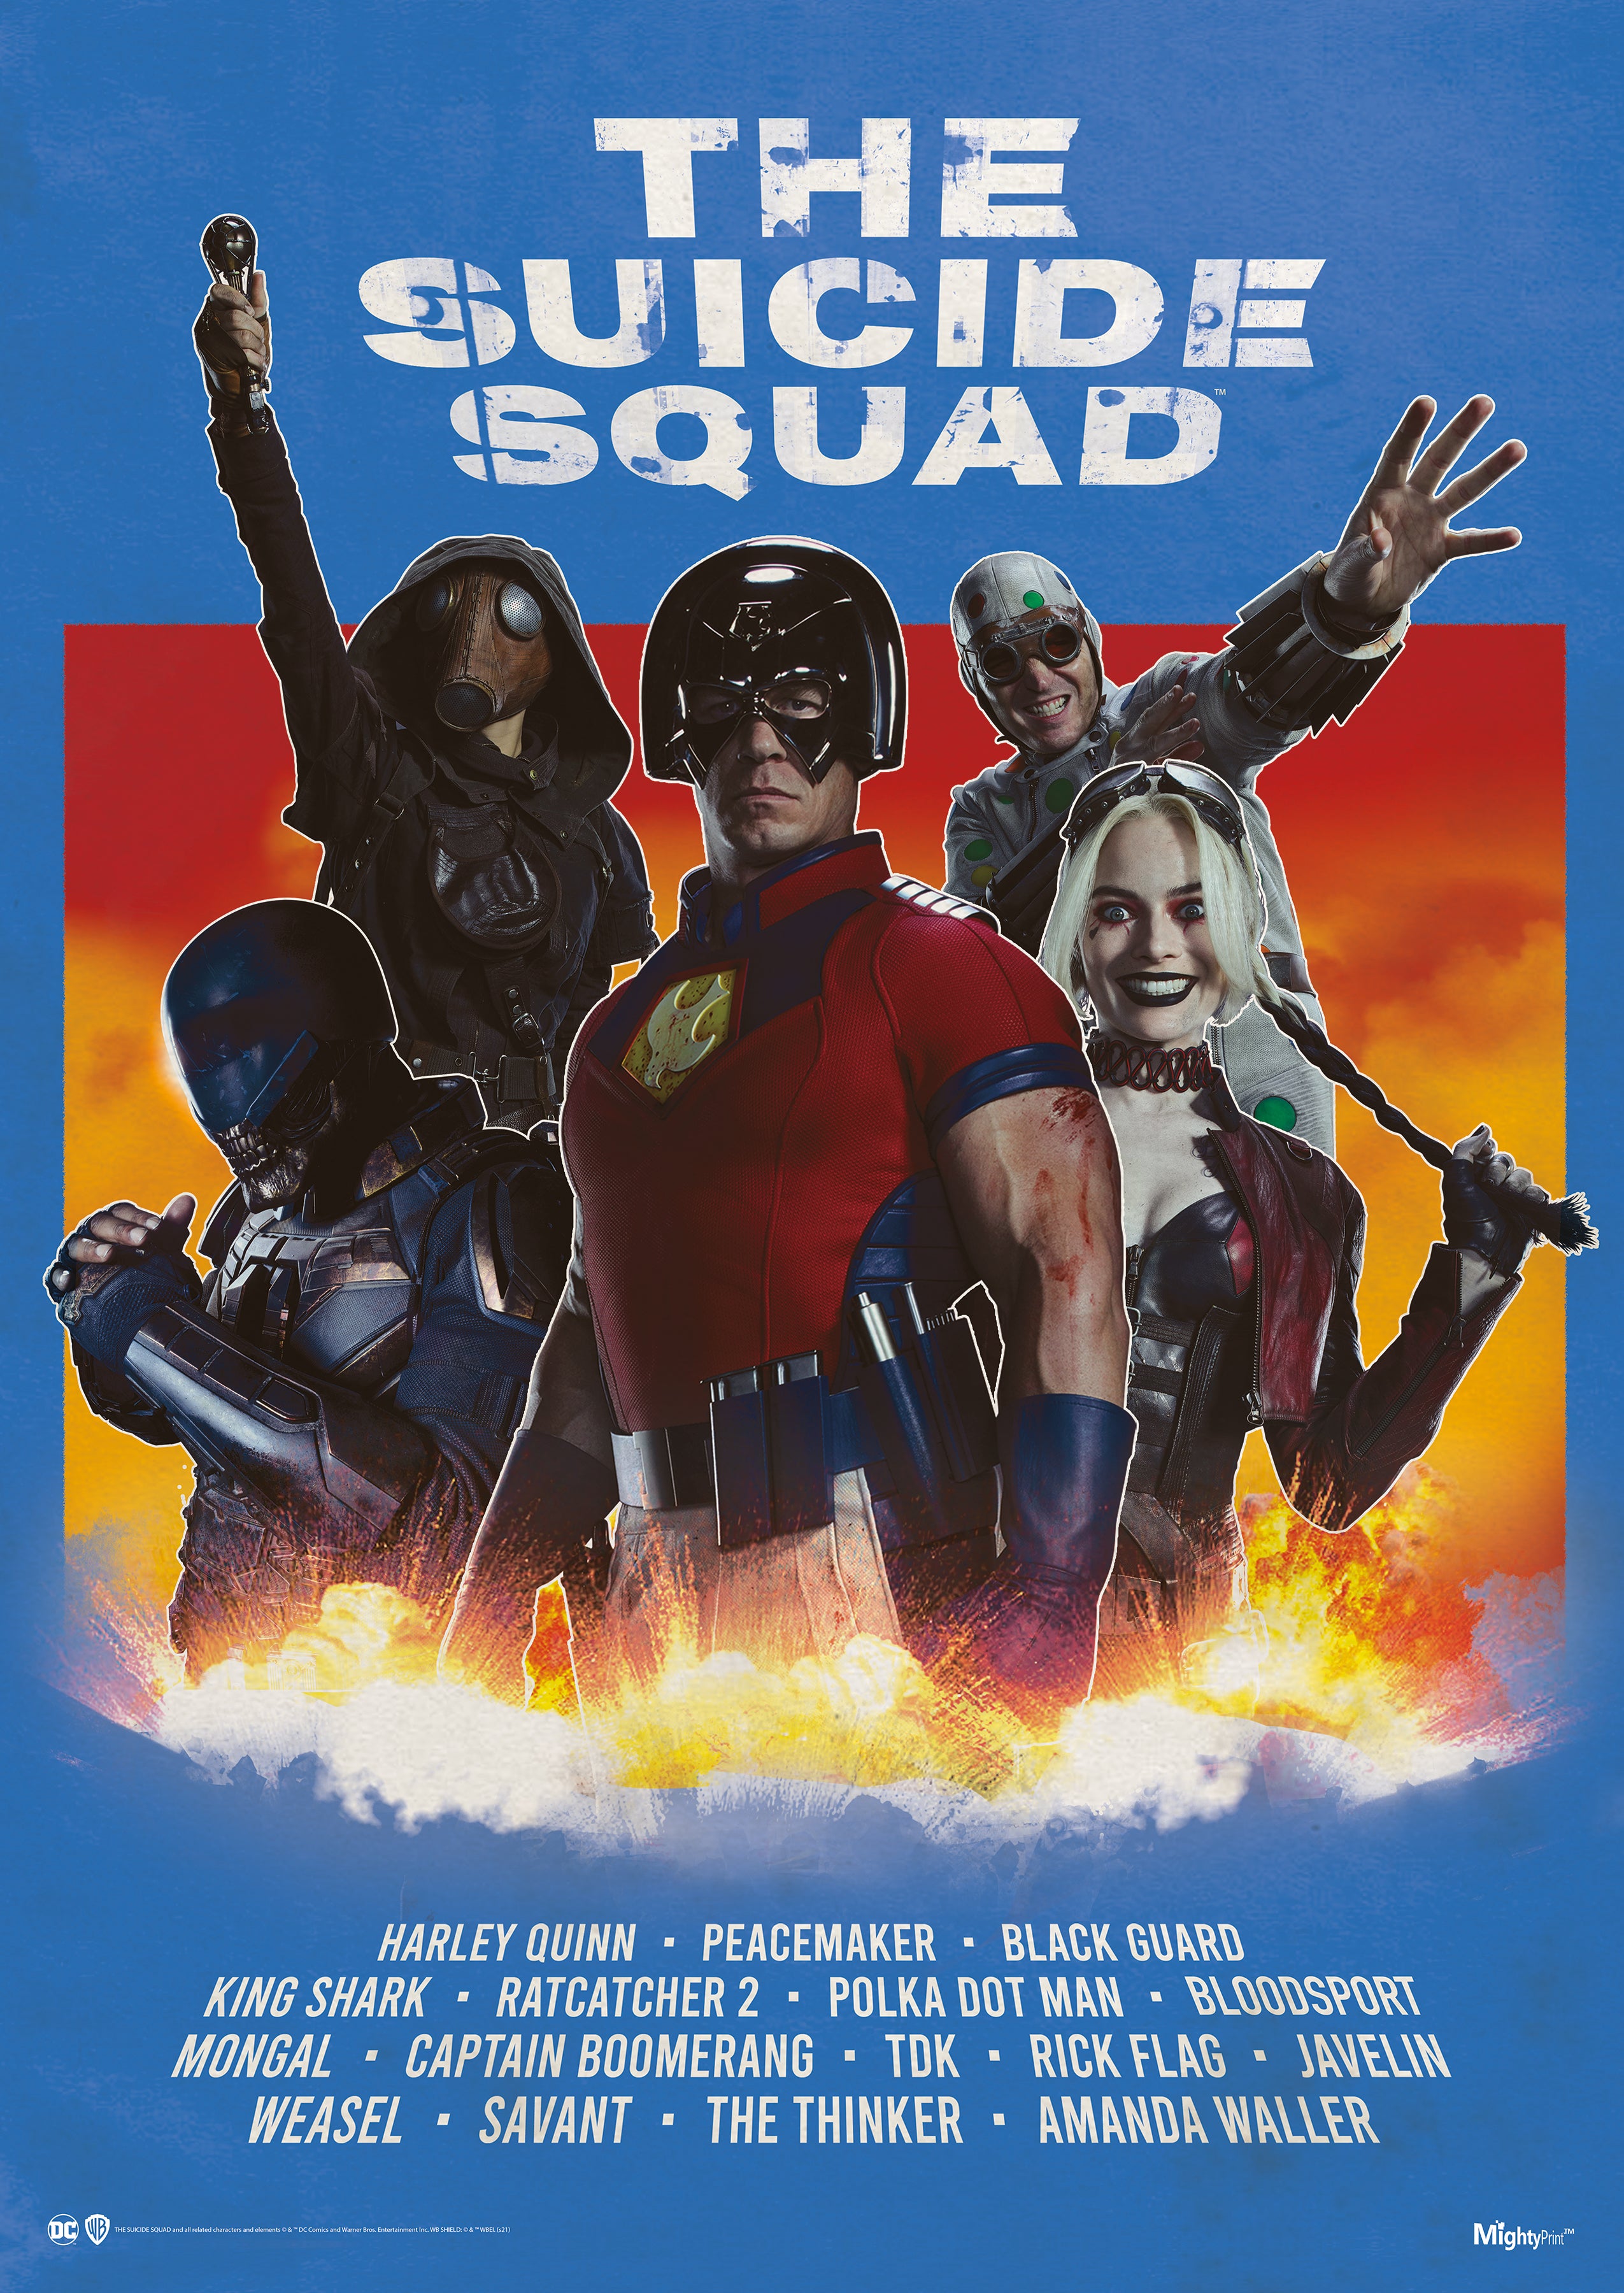 The Suicide Squad (The Suicide Squad) MightyPrint™ Wall Art MP17240668